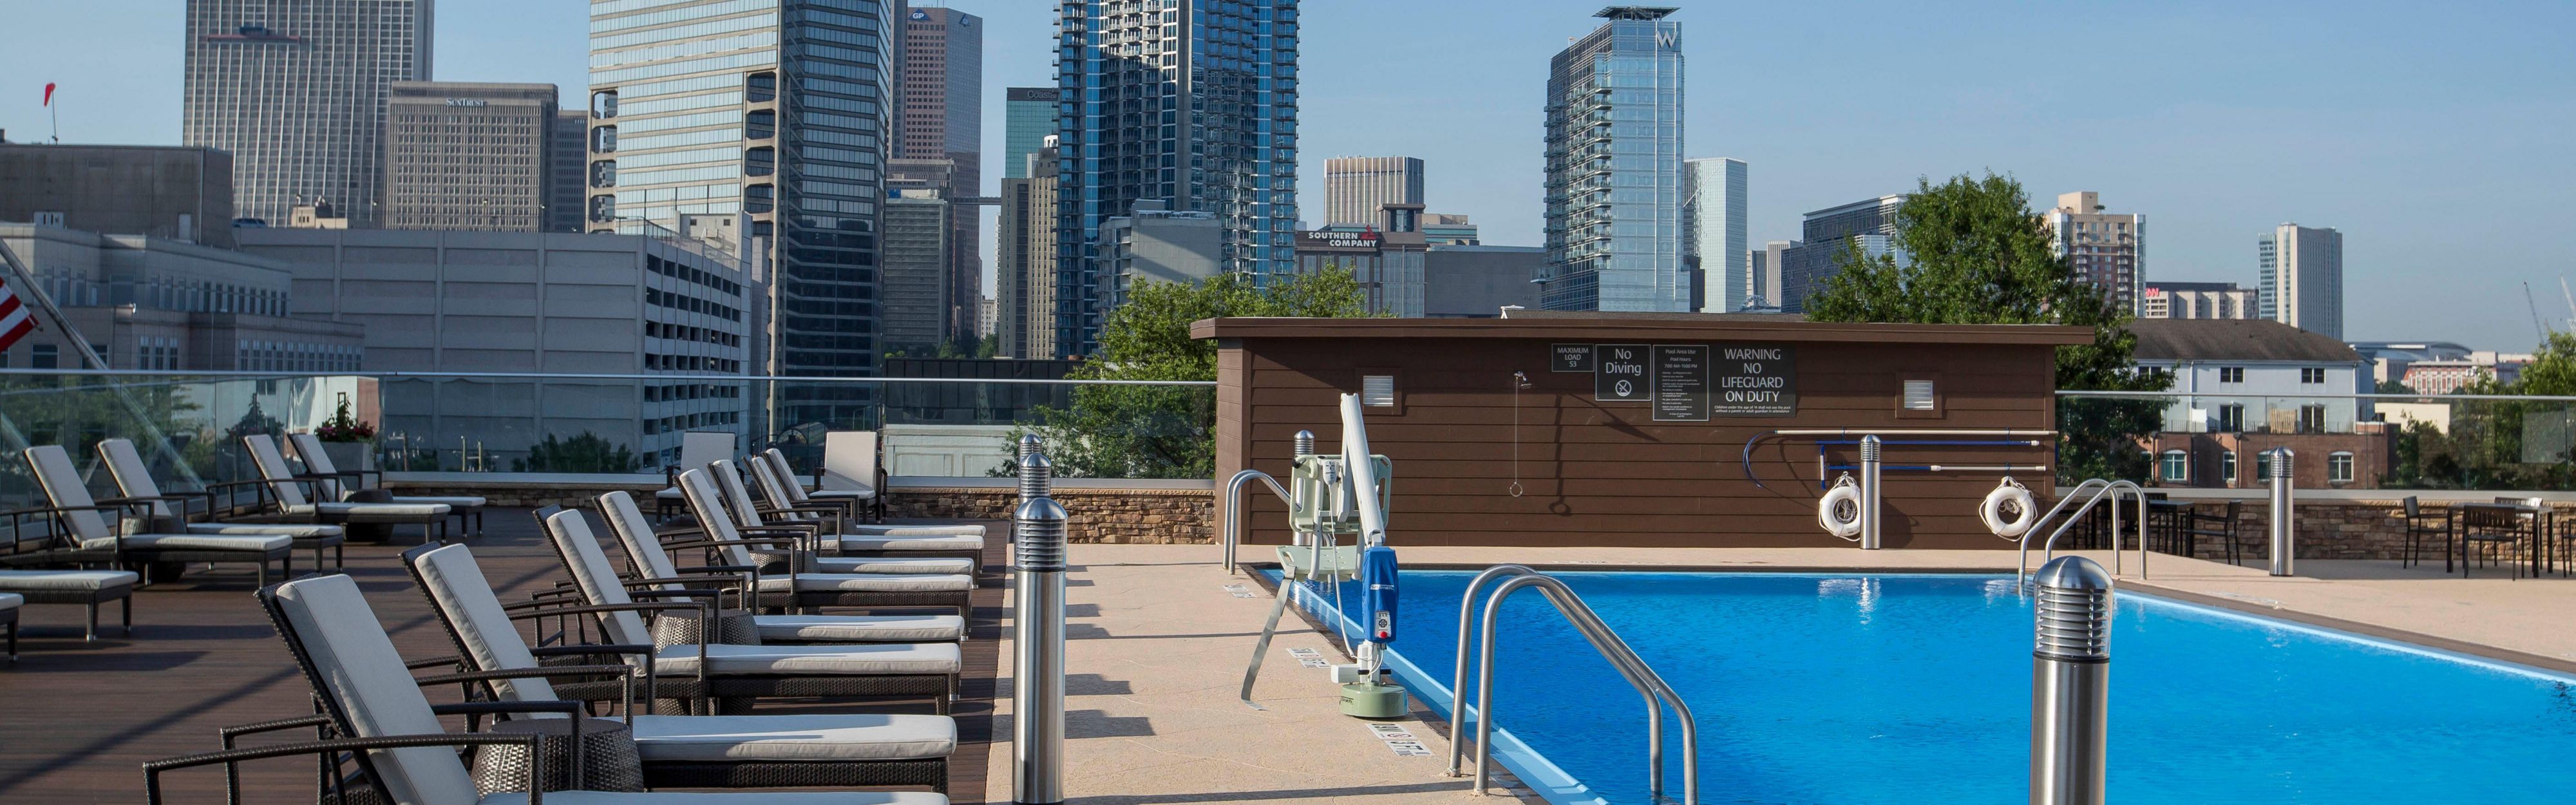 Have a morning dip in our seasonal outdoor rooftop pool